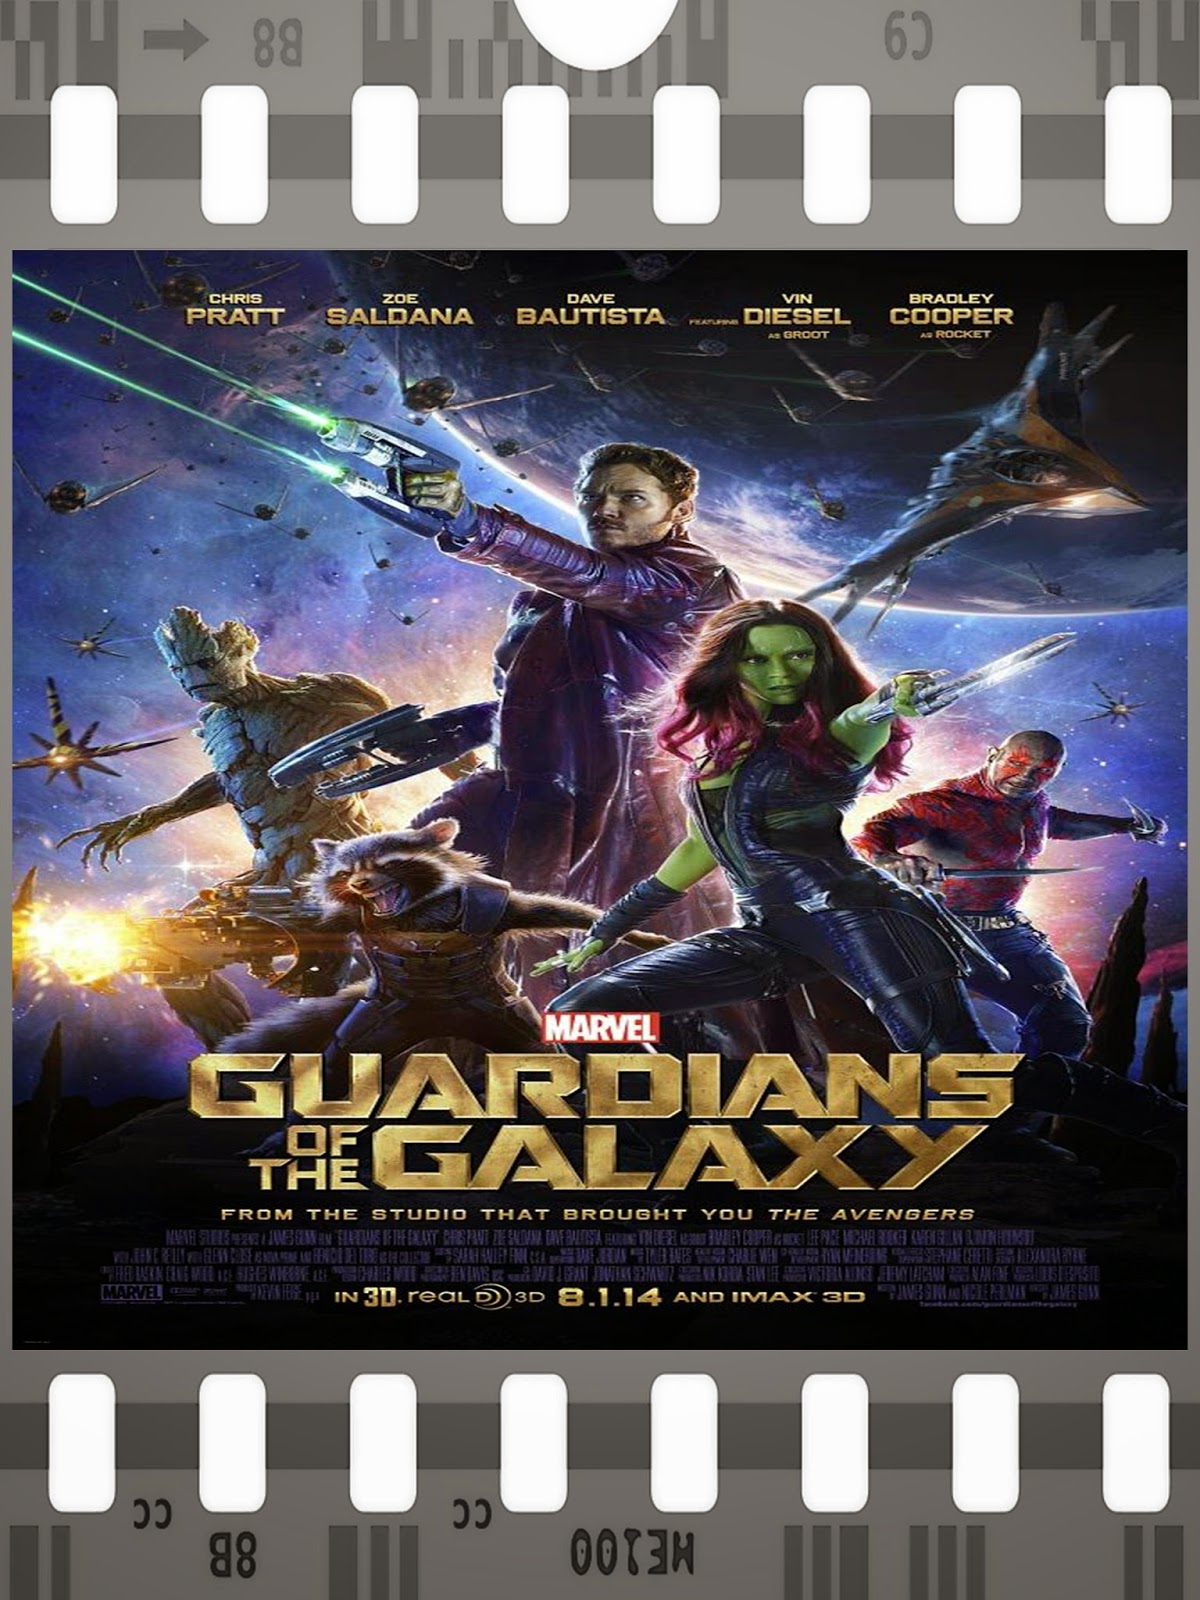 watch guardians of the galaxy online let me watch this